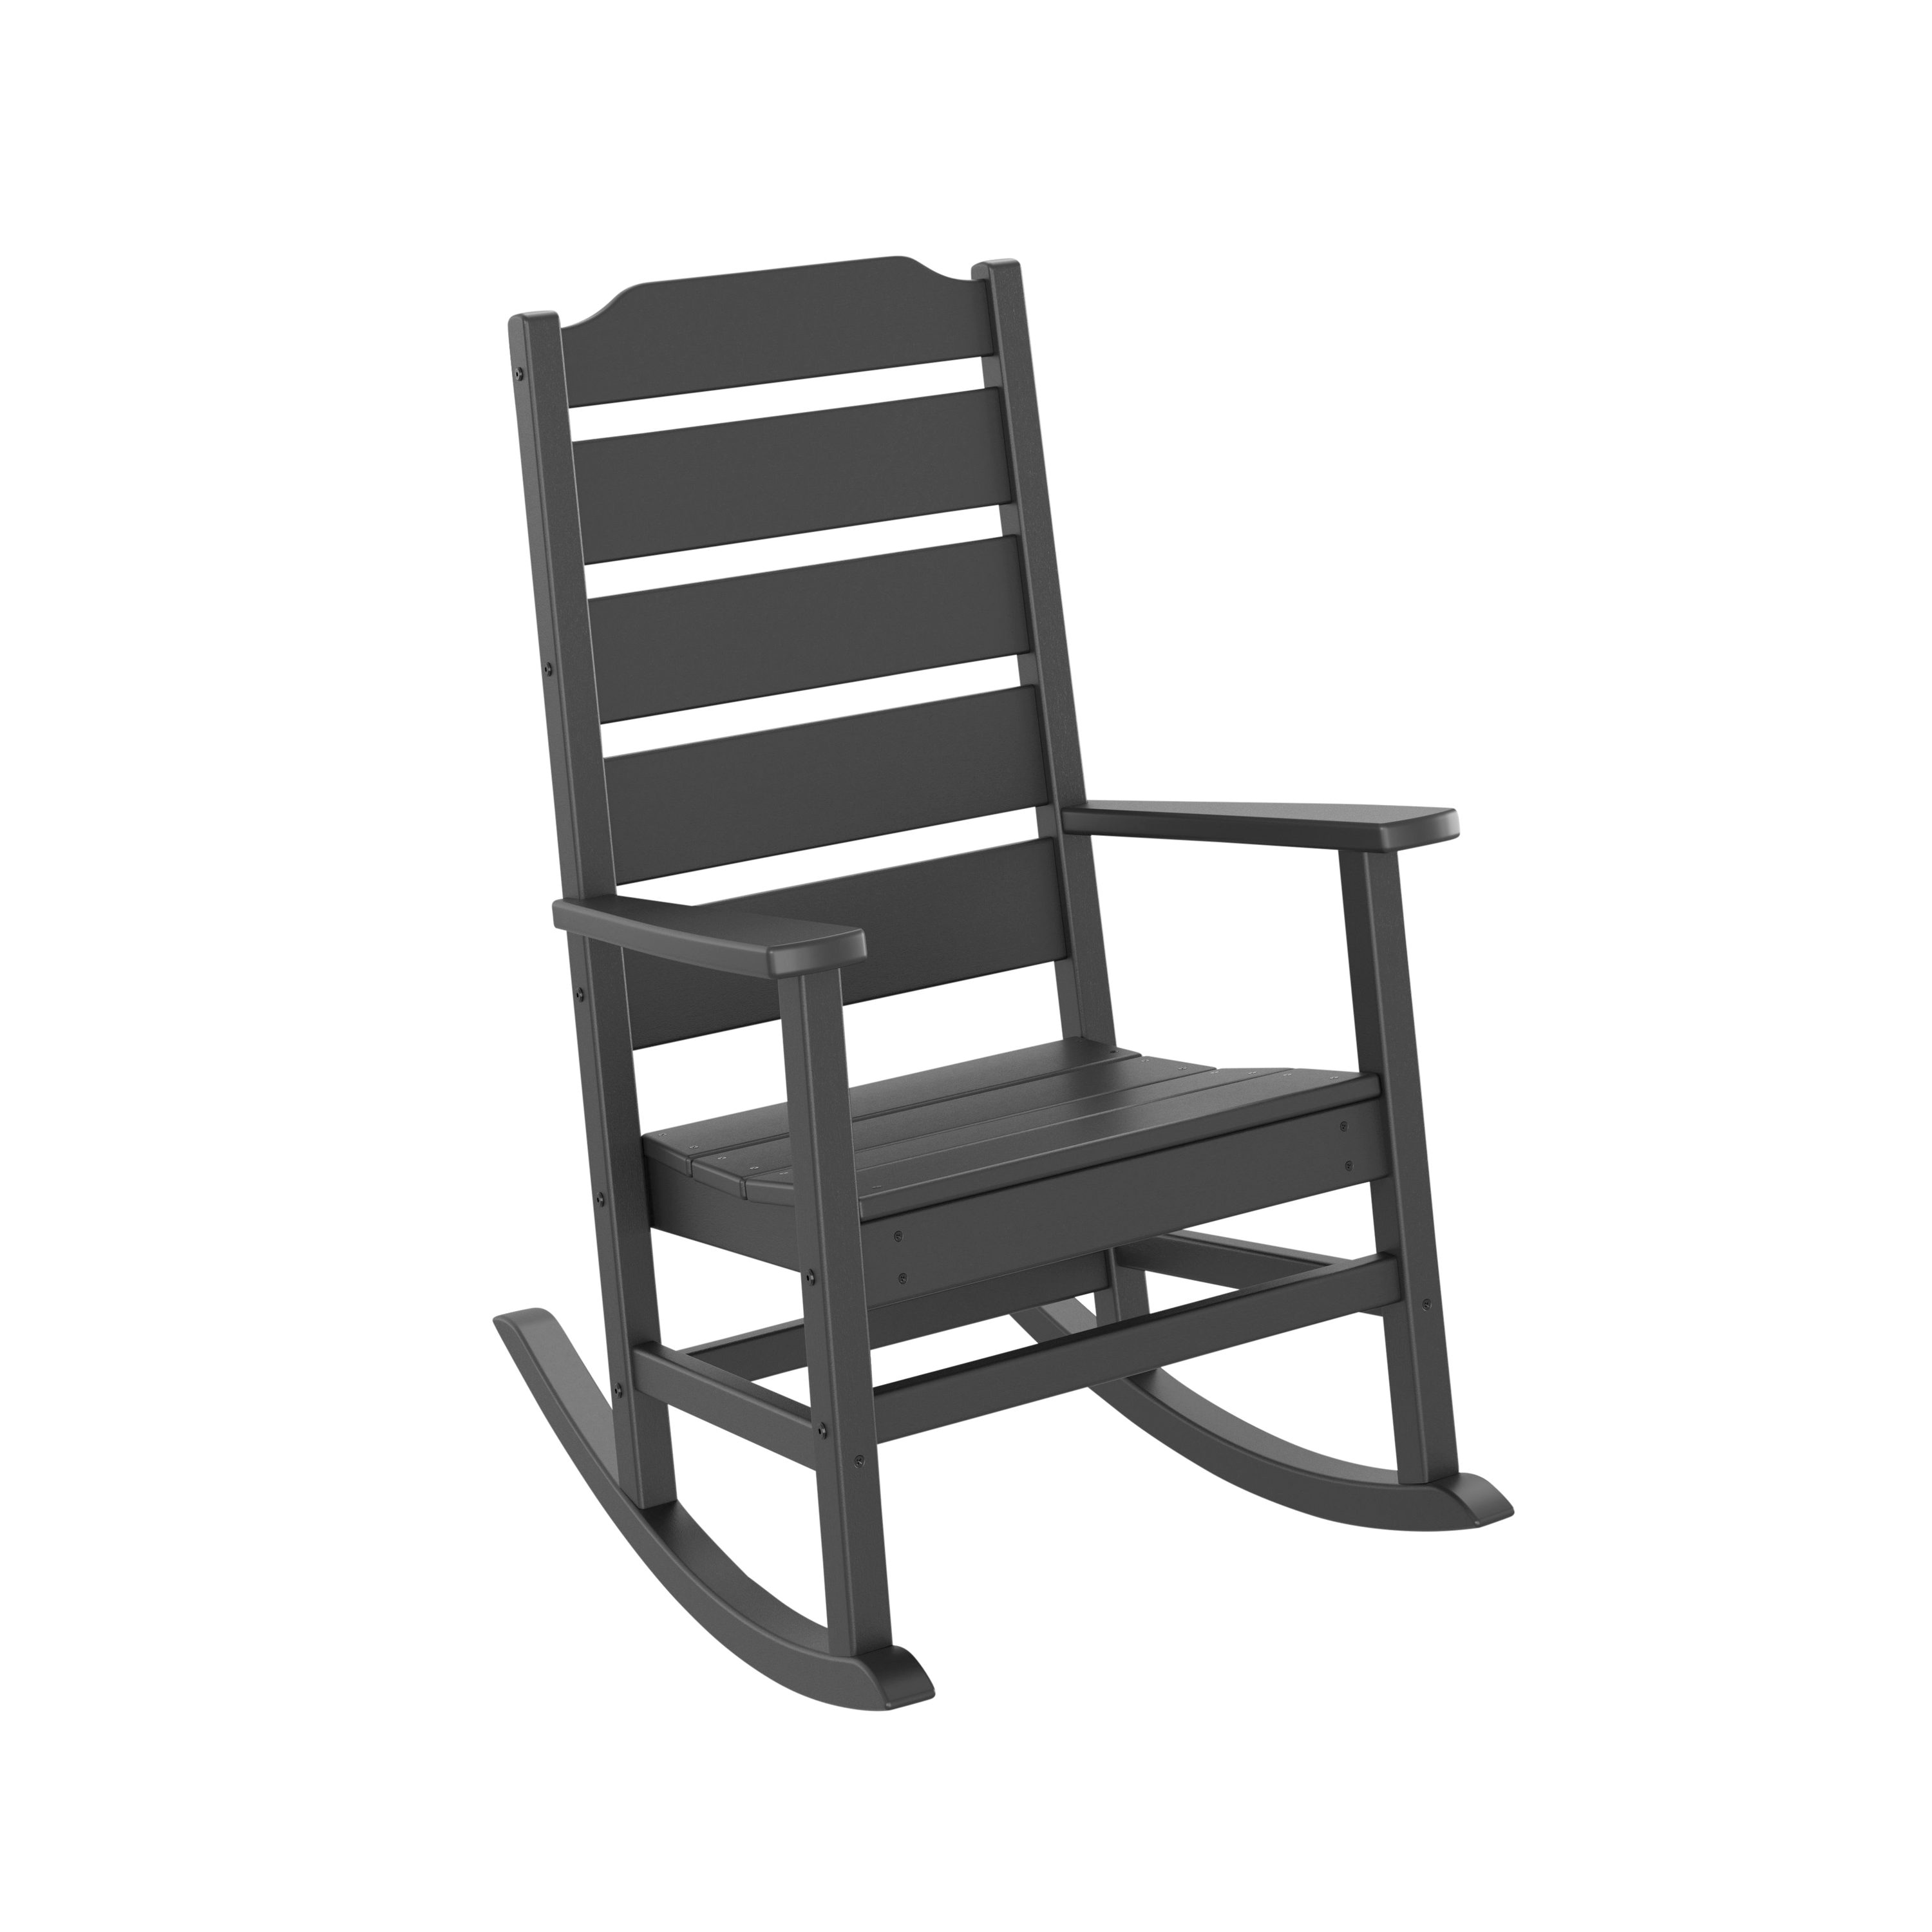 Poly Lumber Patio Rattan High Back Rocking Chair,Porch Rocker with High Back ,Support Rocking Chairs for Both Outdoor and Indoor